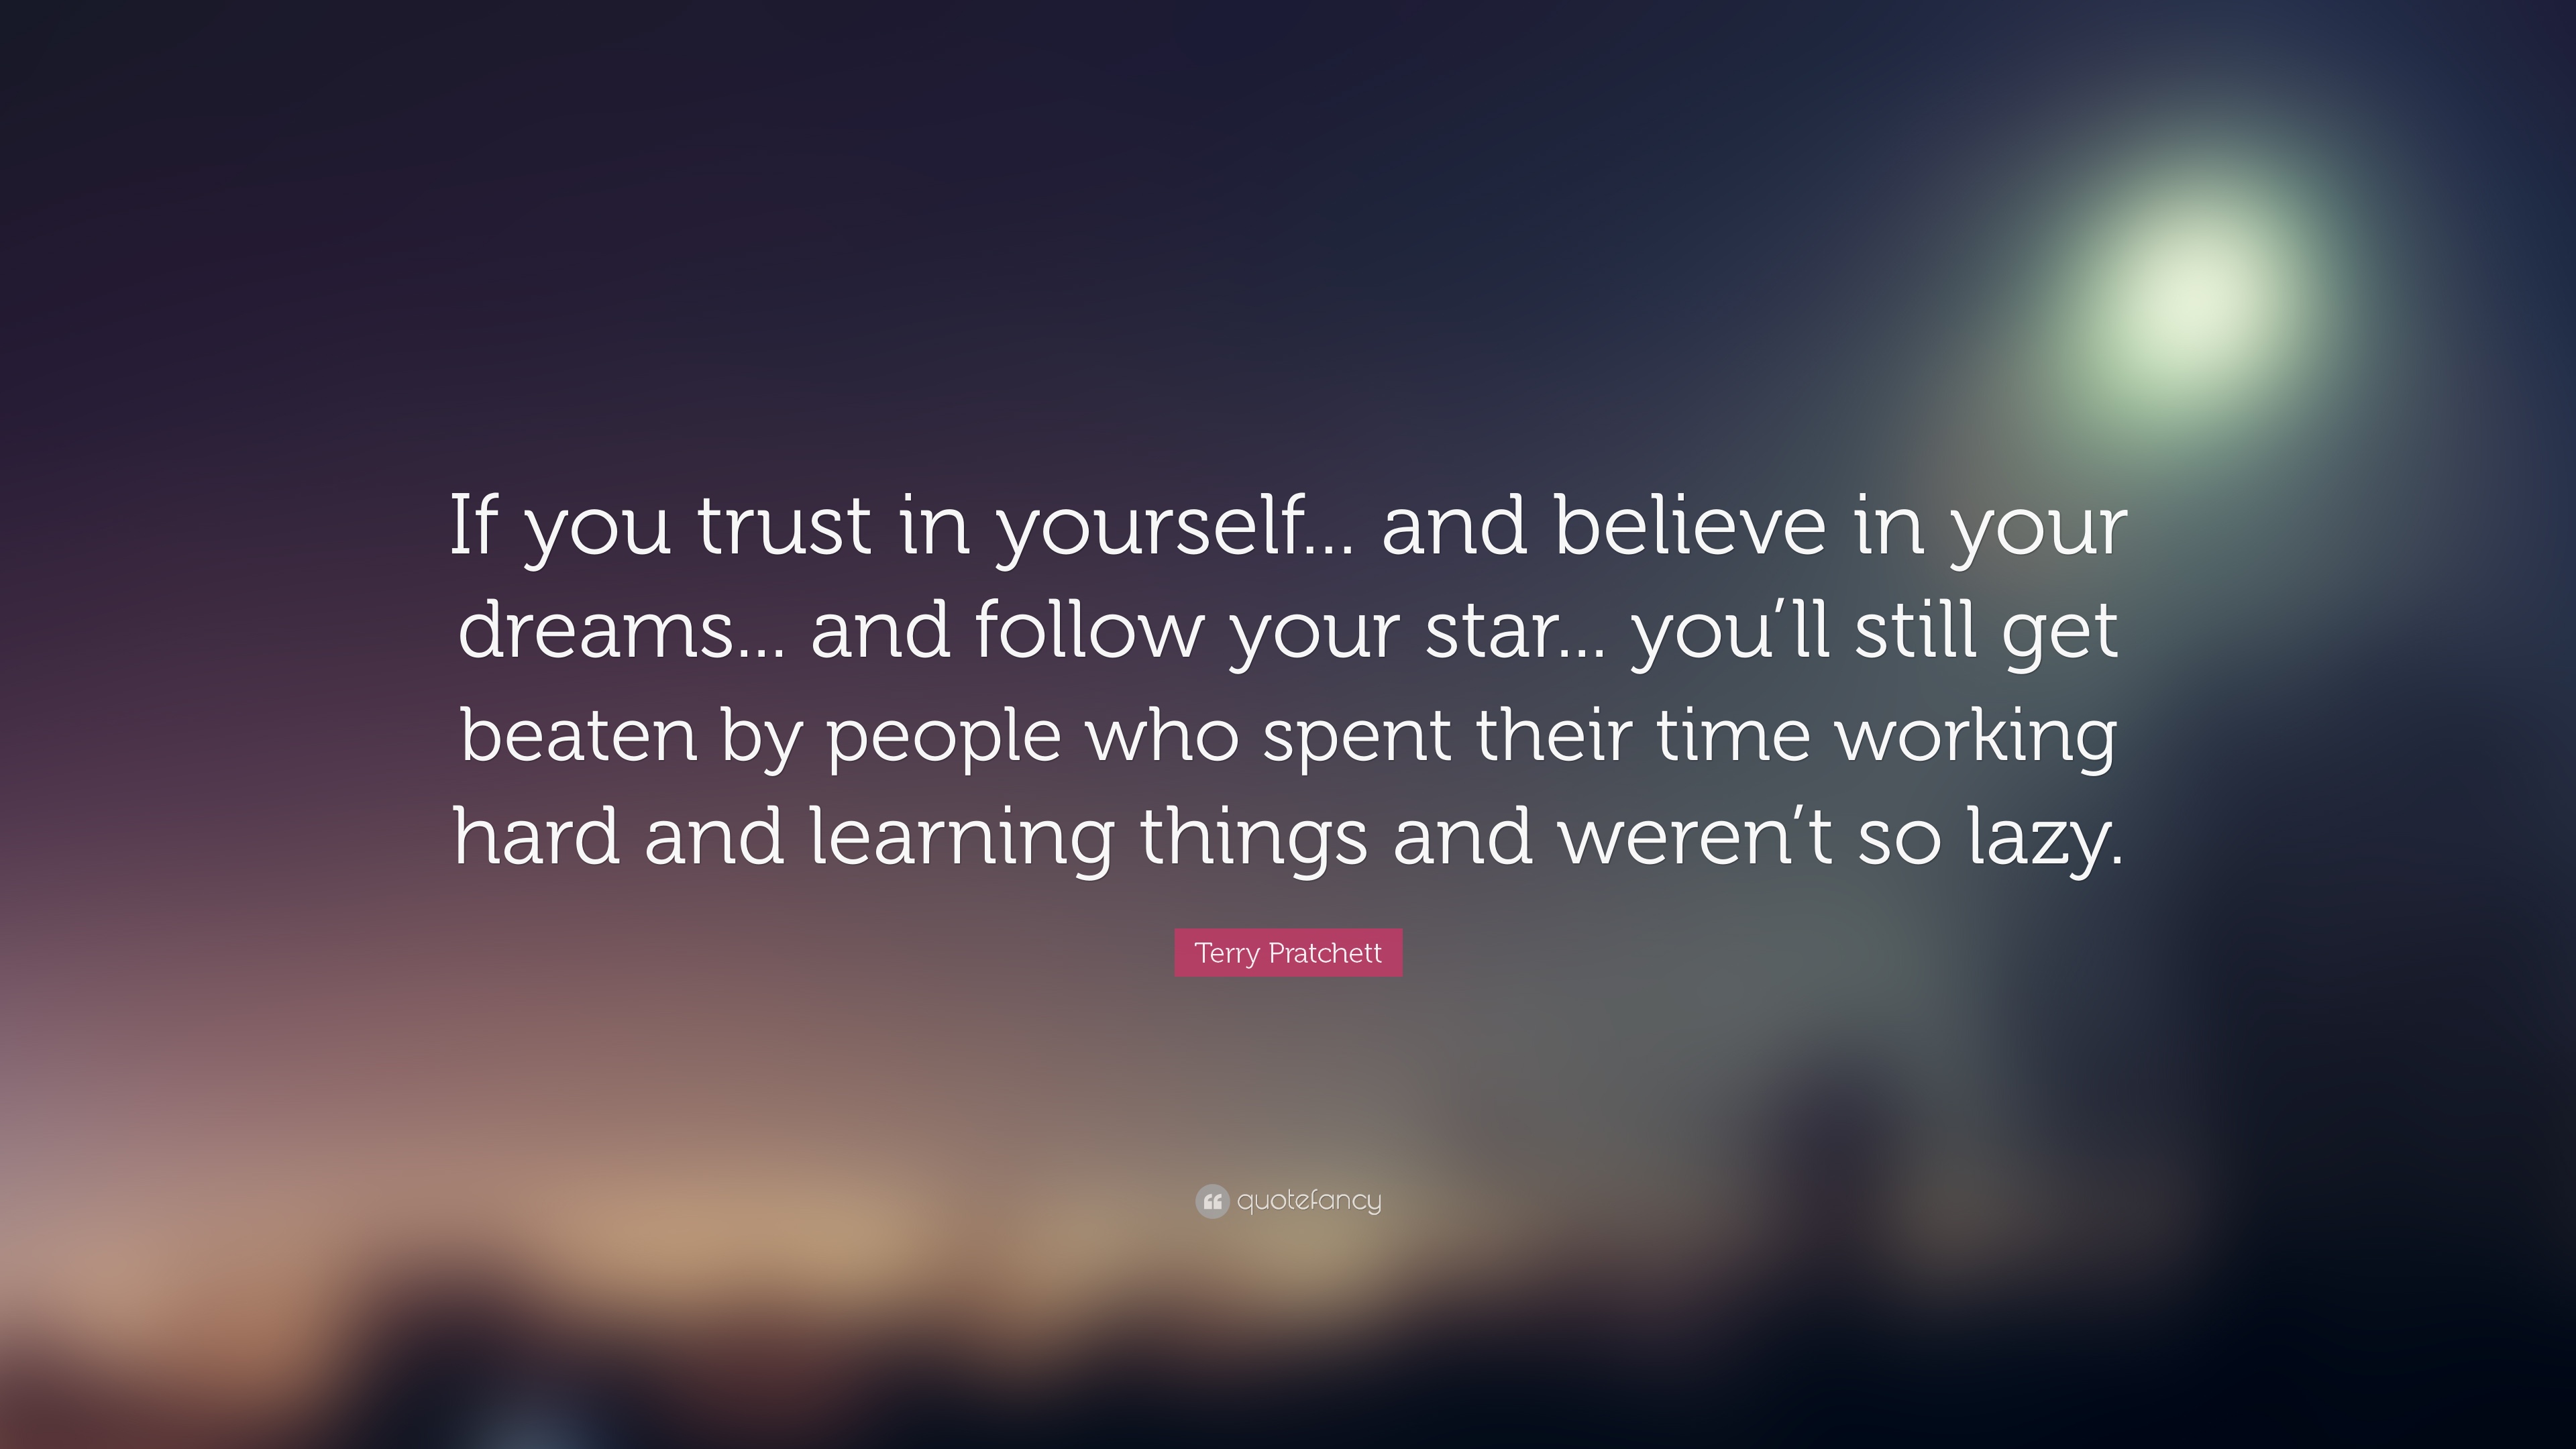 If you trust in yourself... and believe in your dreams... and follow your star... you’ll still get beaten by people who spent their time working hard and learning and weren't so lazy.